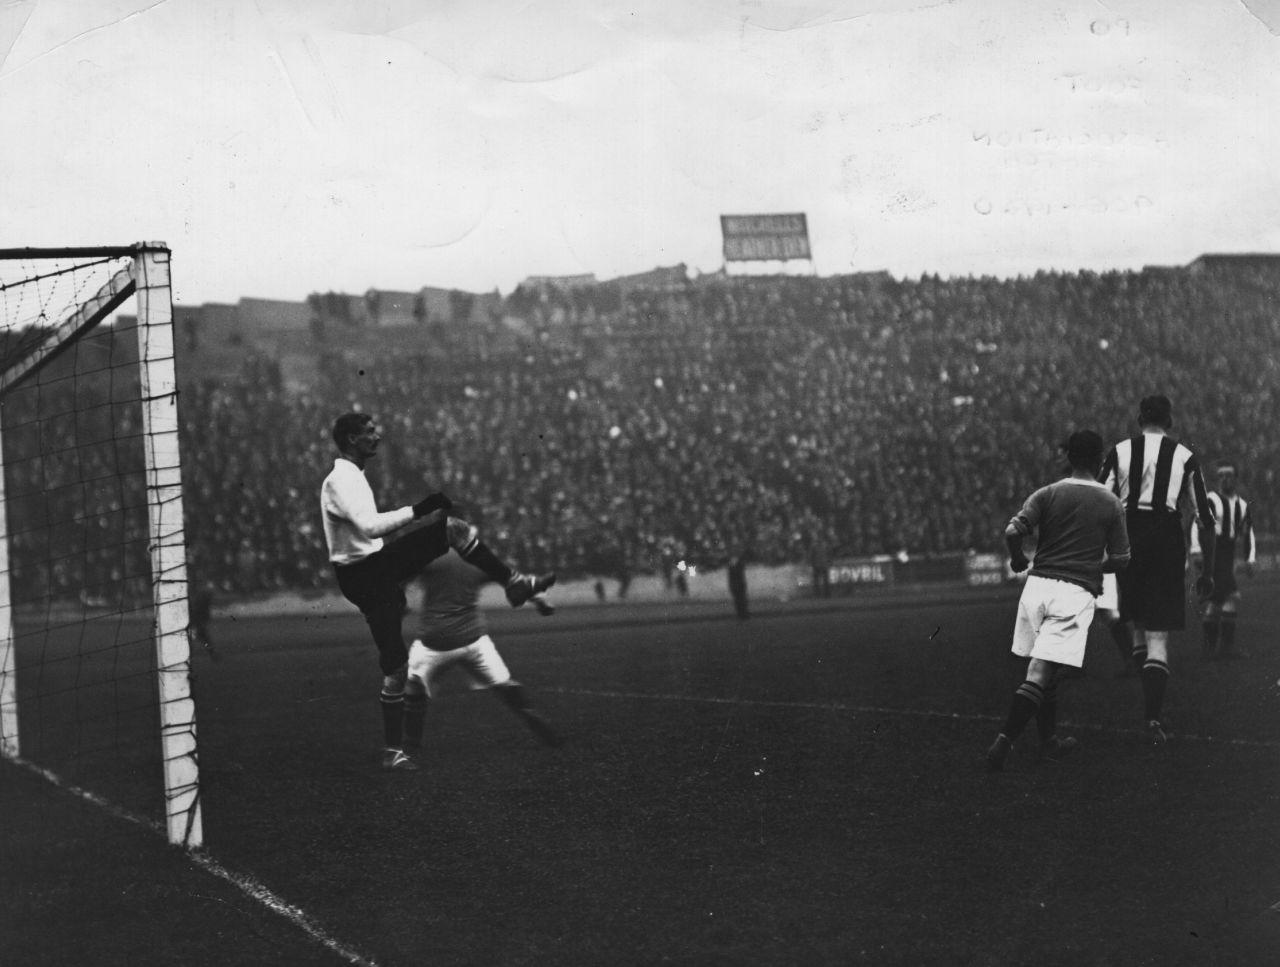 By the 1900s however, the football club had taken over. This match took place at Stamford Bridge in September 1909.